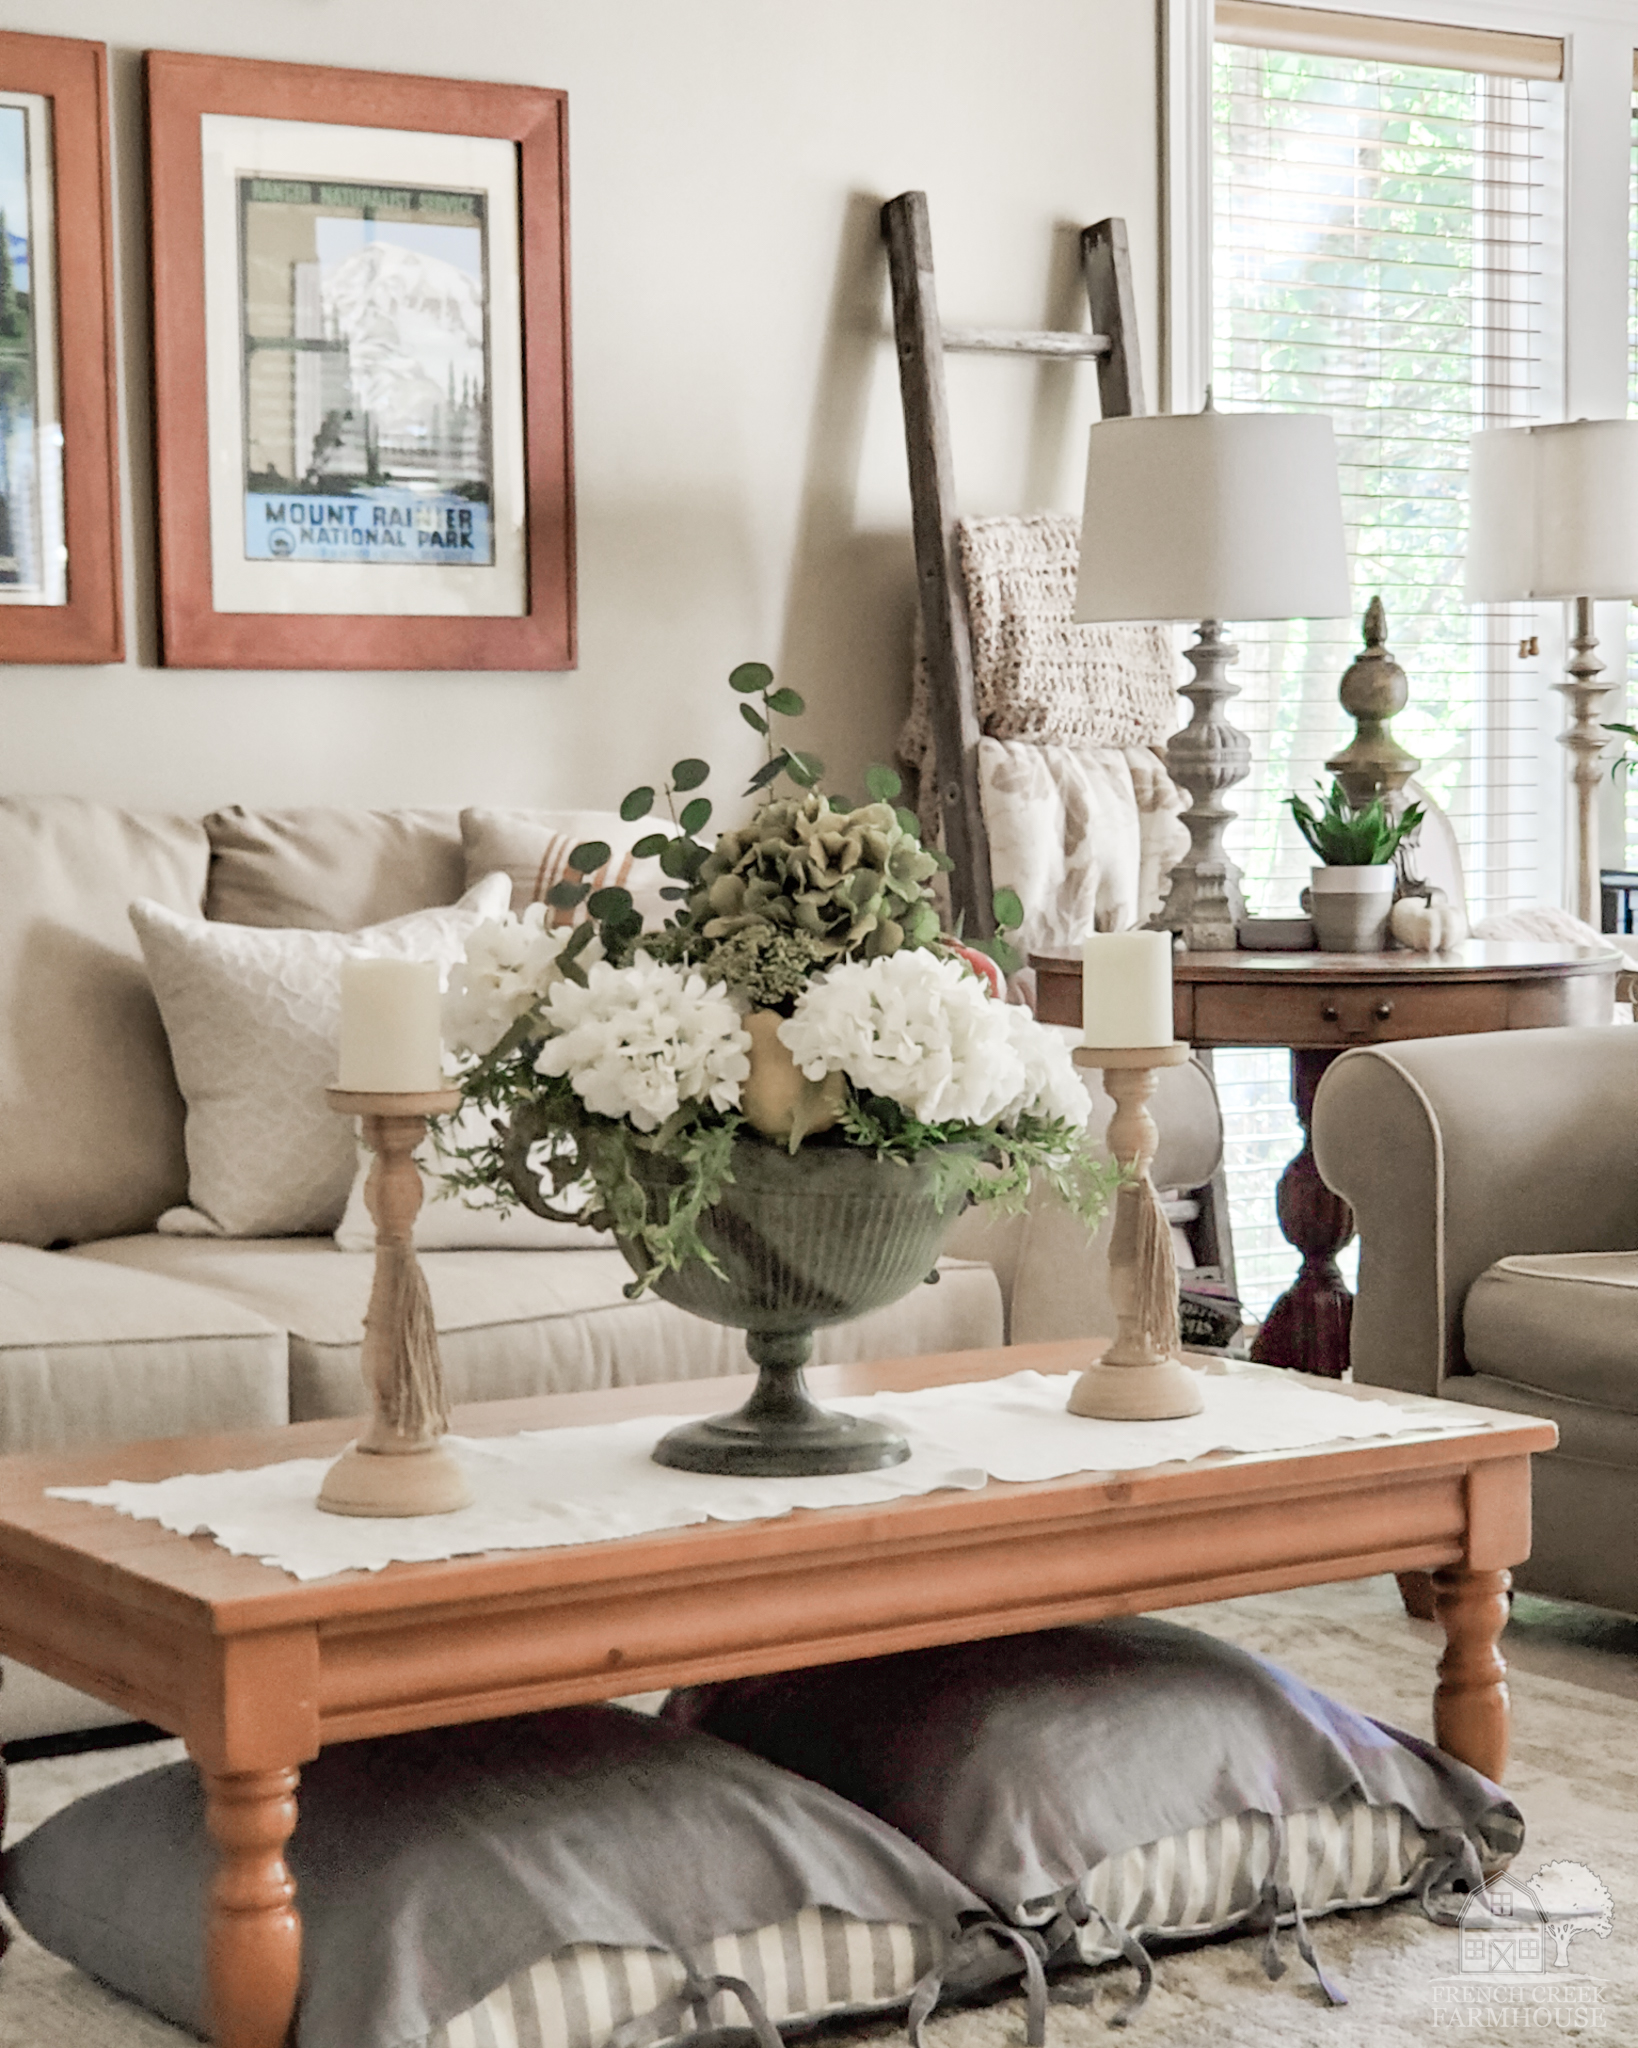 Cozy neutral decor and florals are ideal for autumn